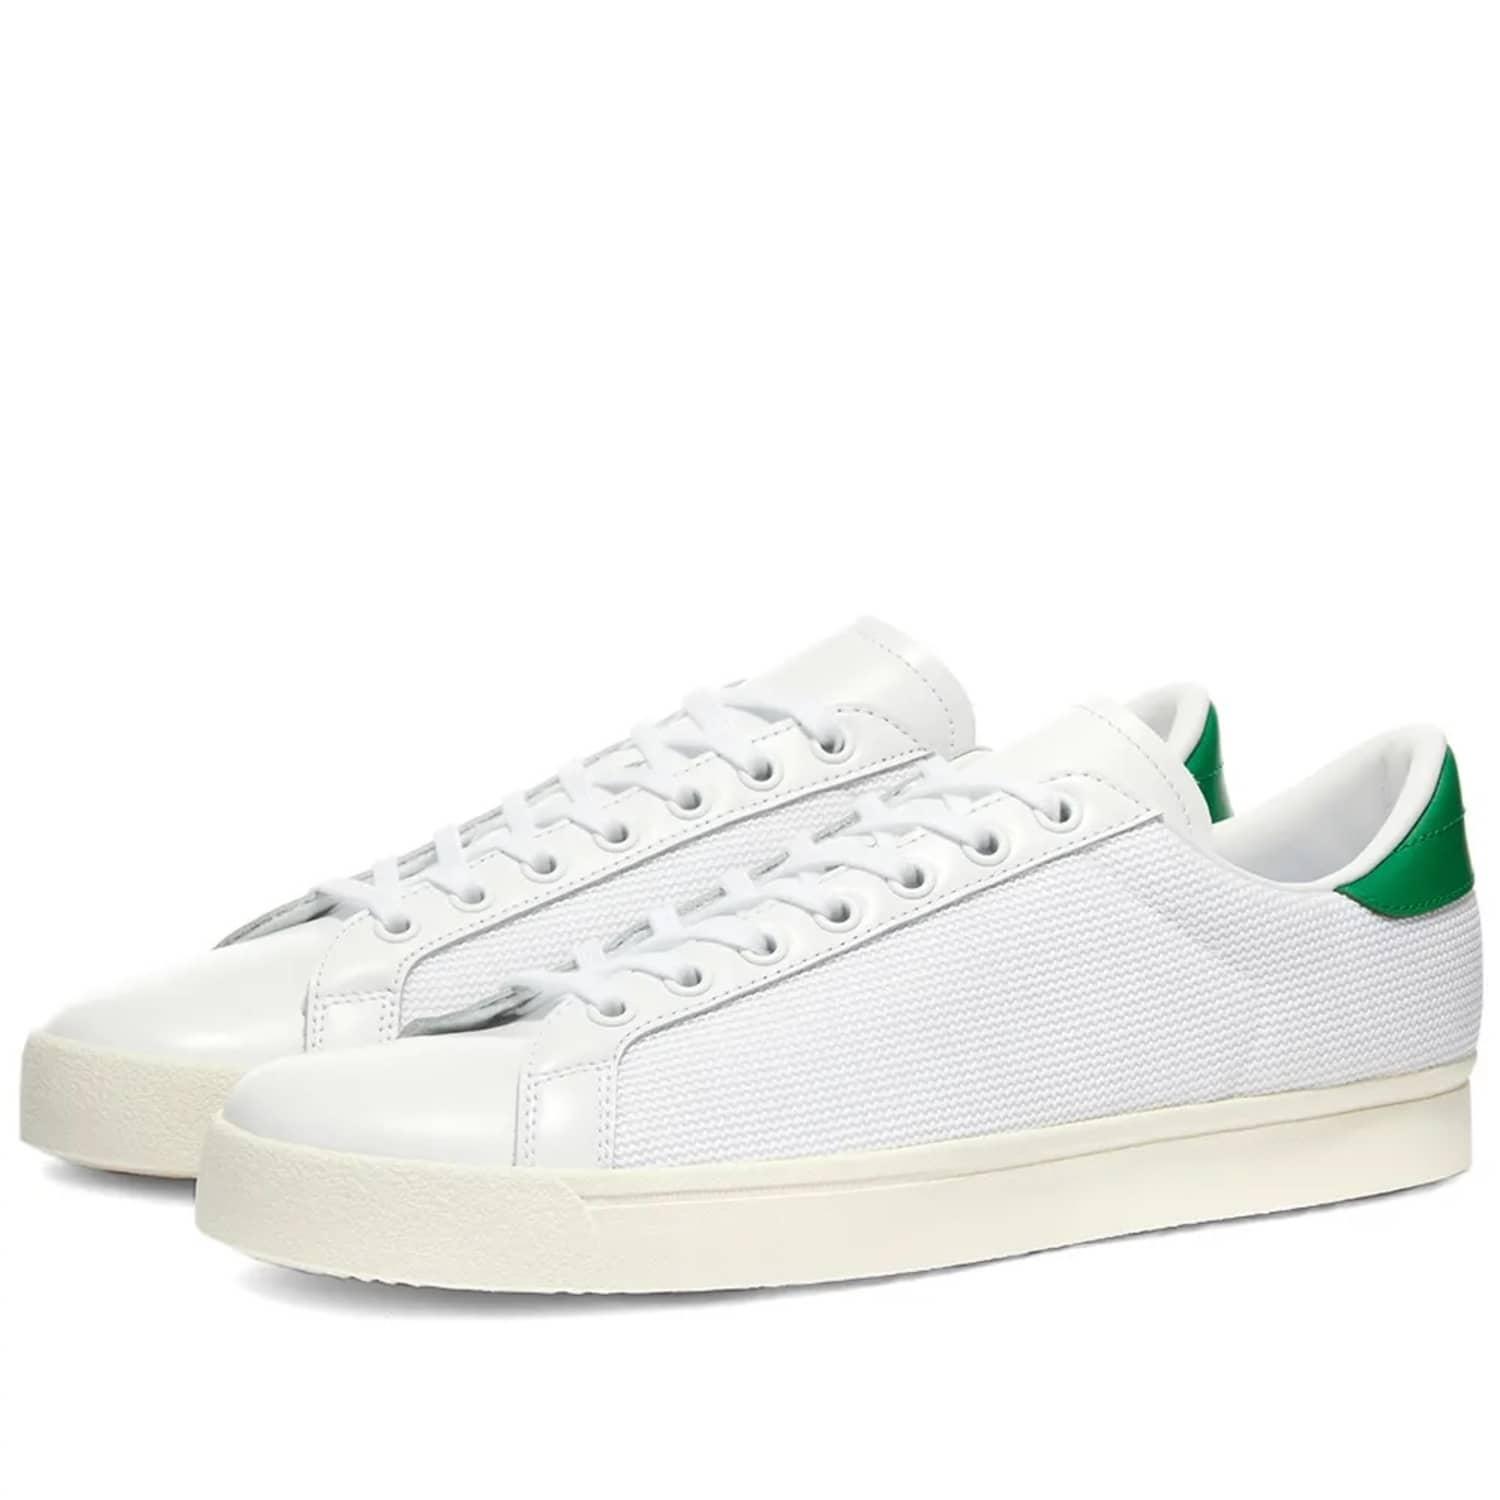 adidas Leather Rod Laver Vintage in White & Green (White) for Men - Save  66% - Lyst